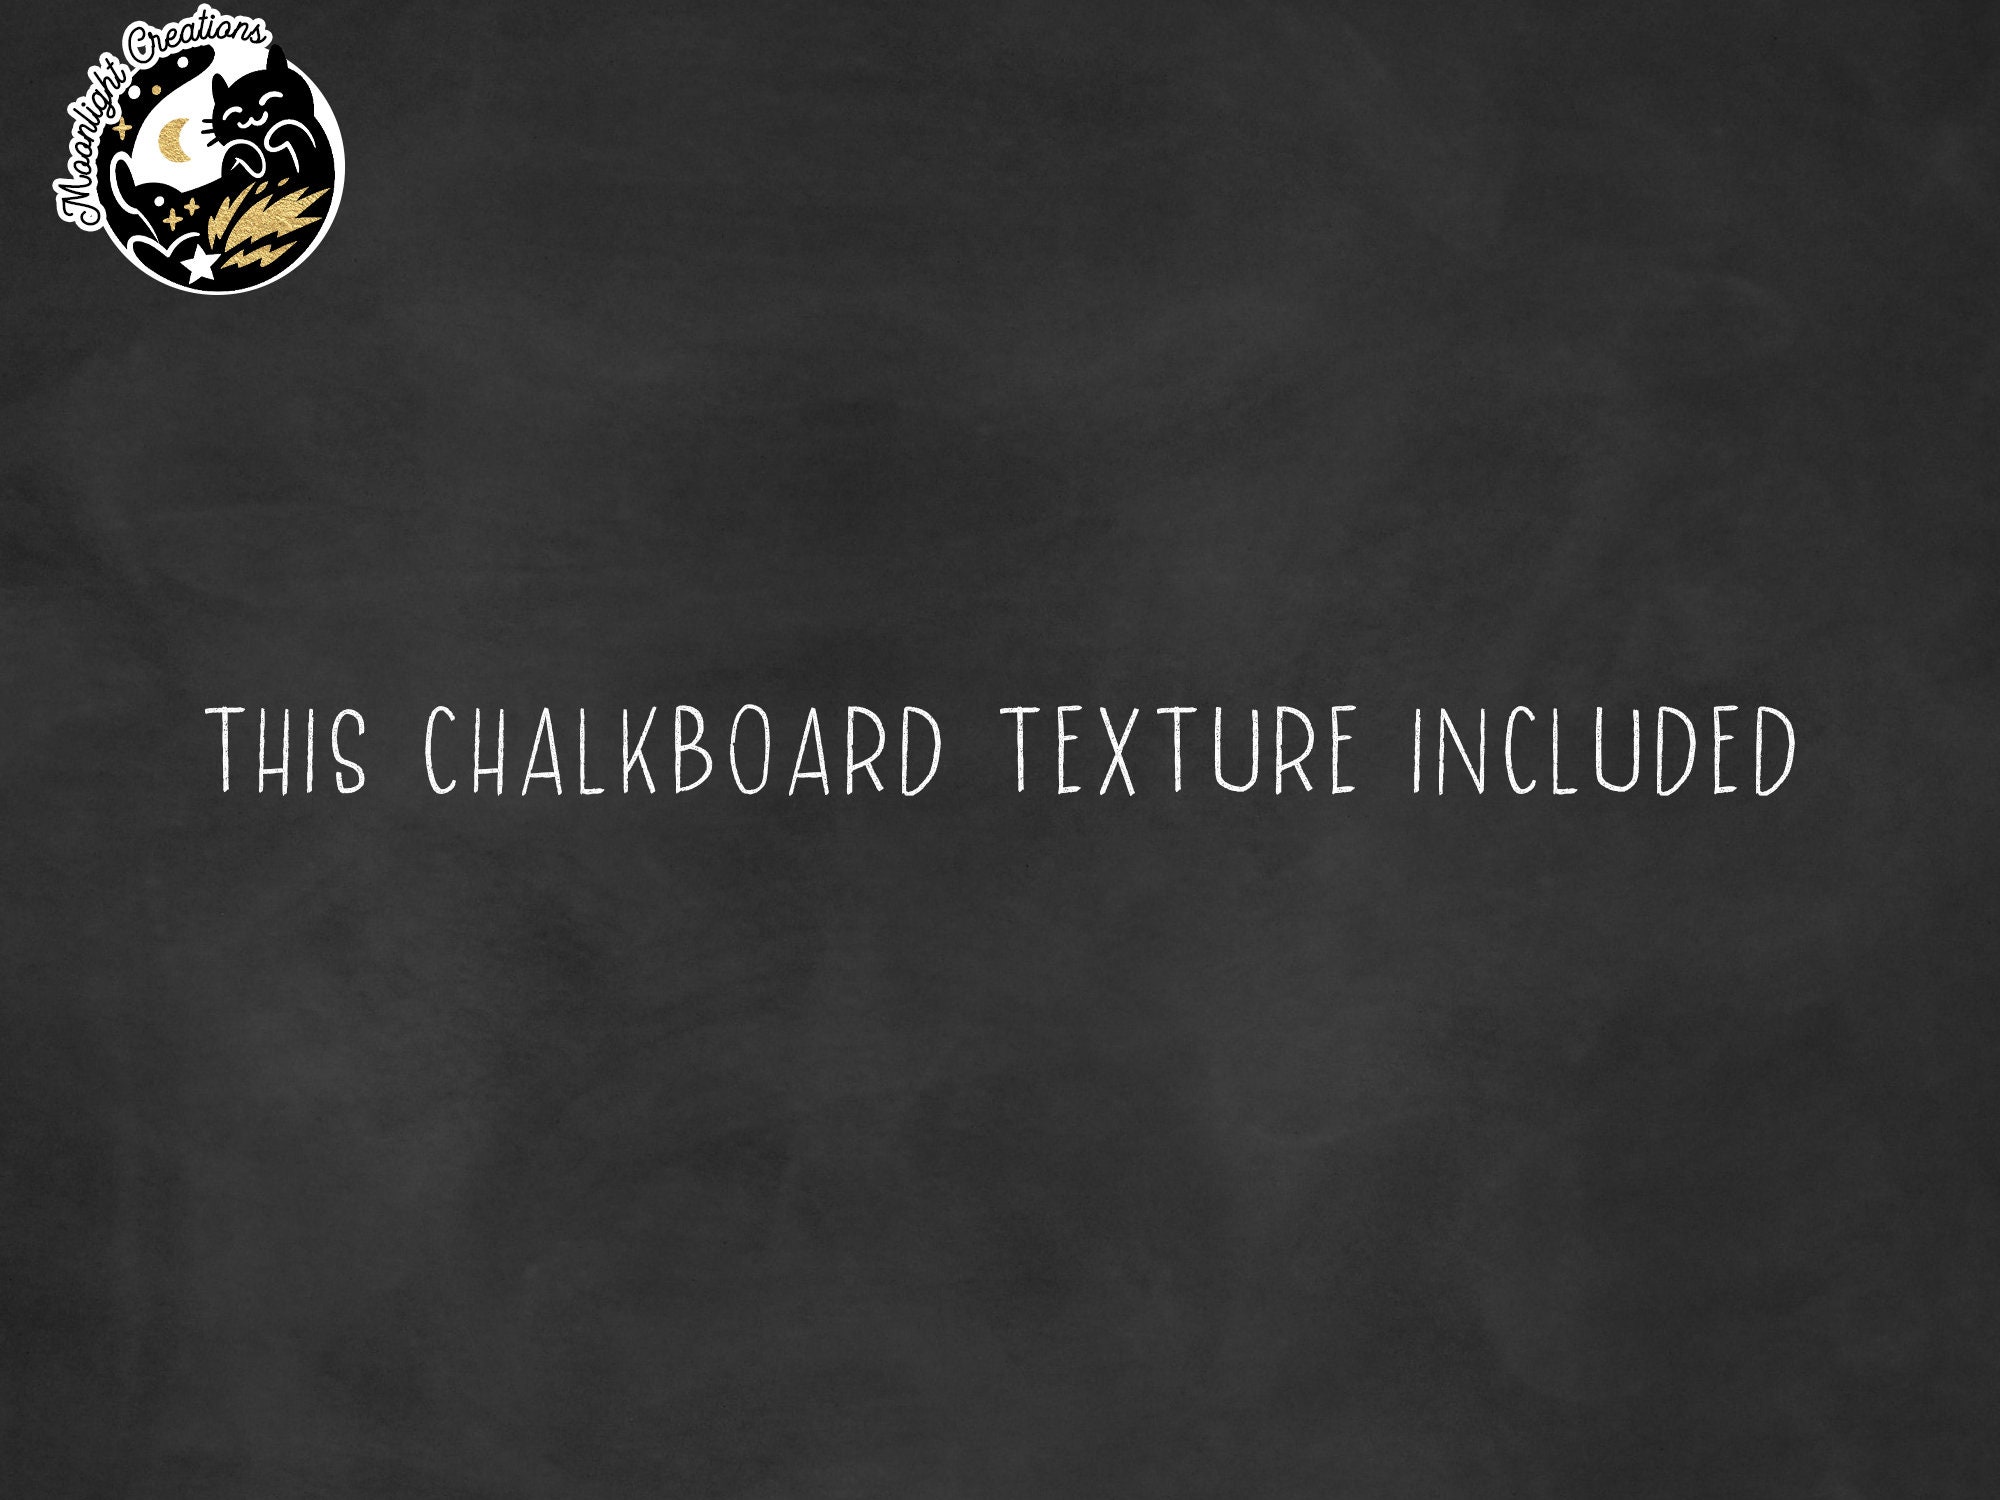 Chalkboard Labels - Chalk Effect Graphic by Moonlight Creations